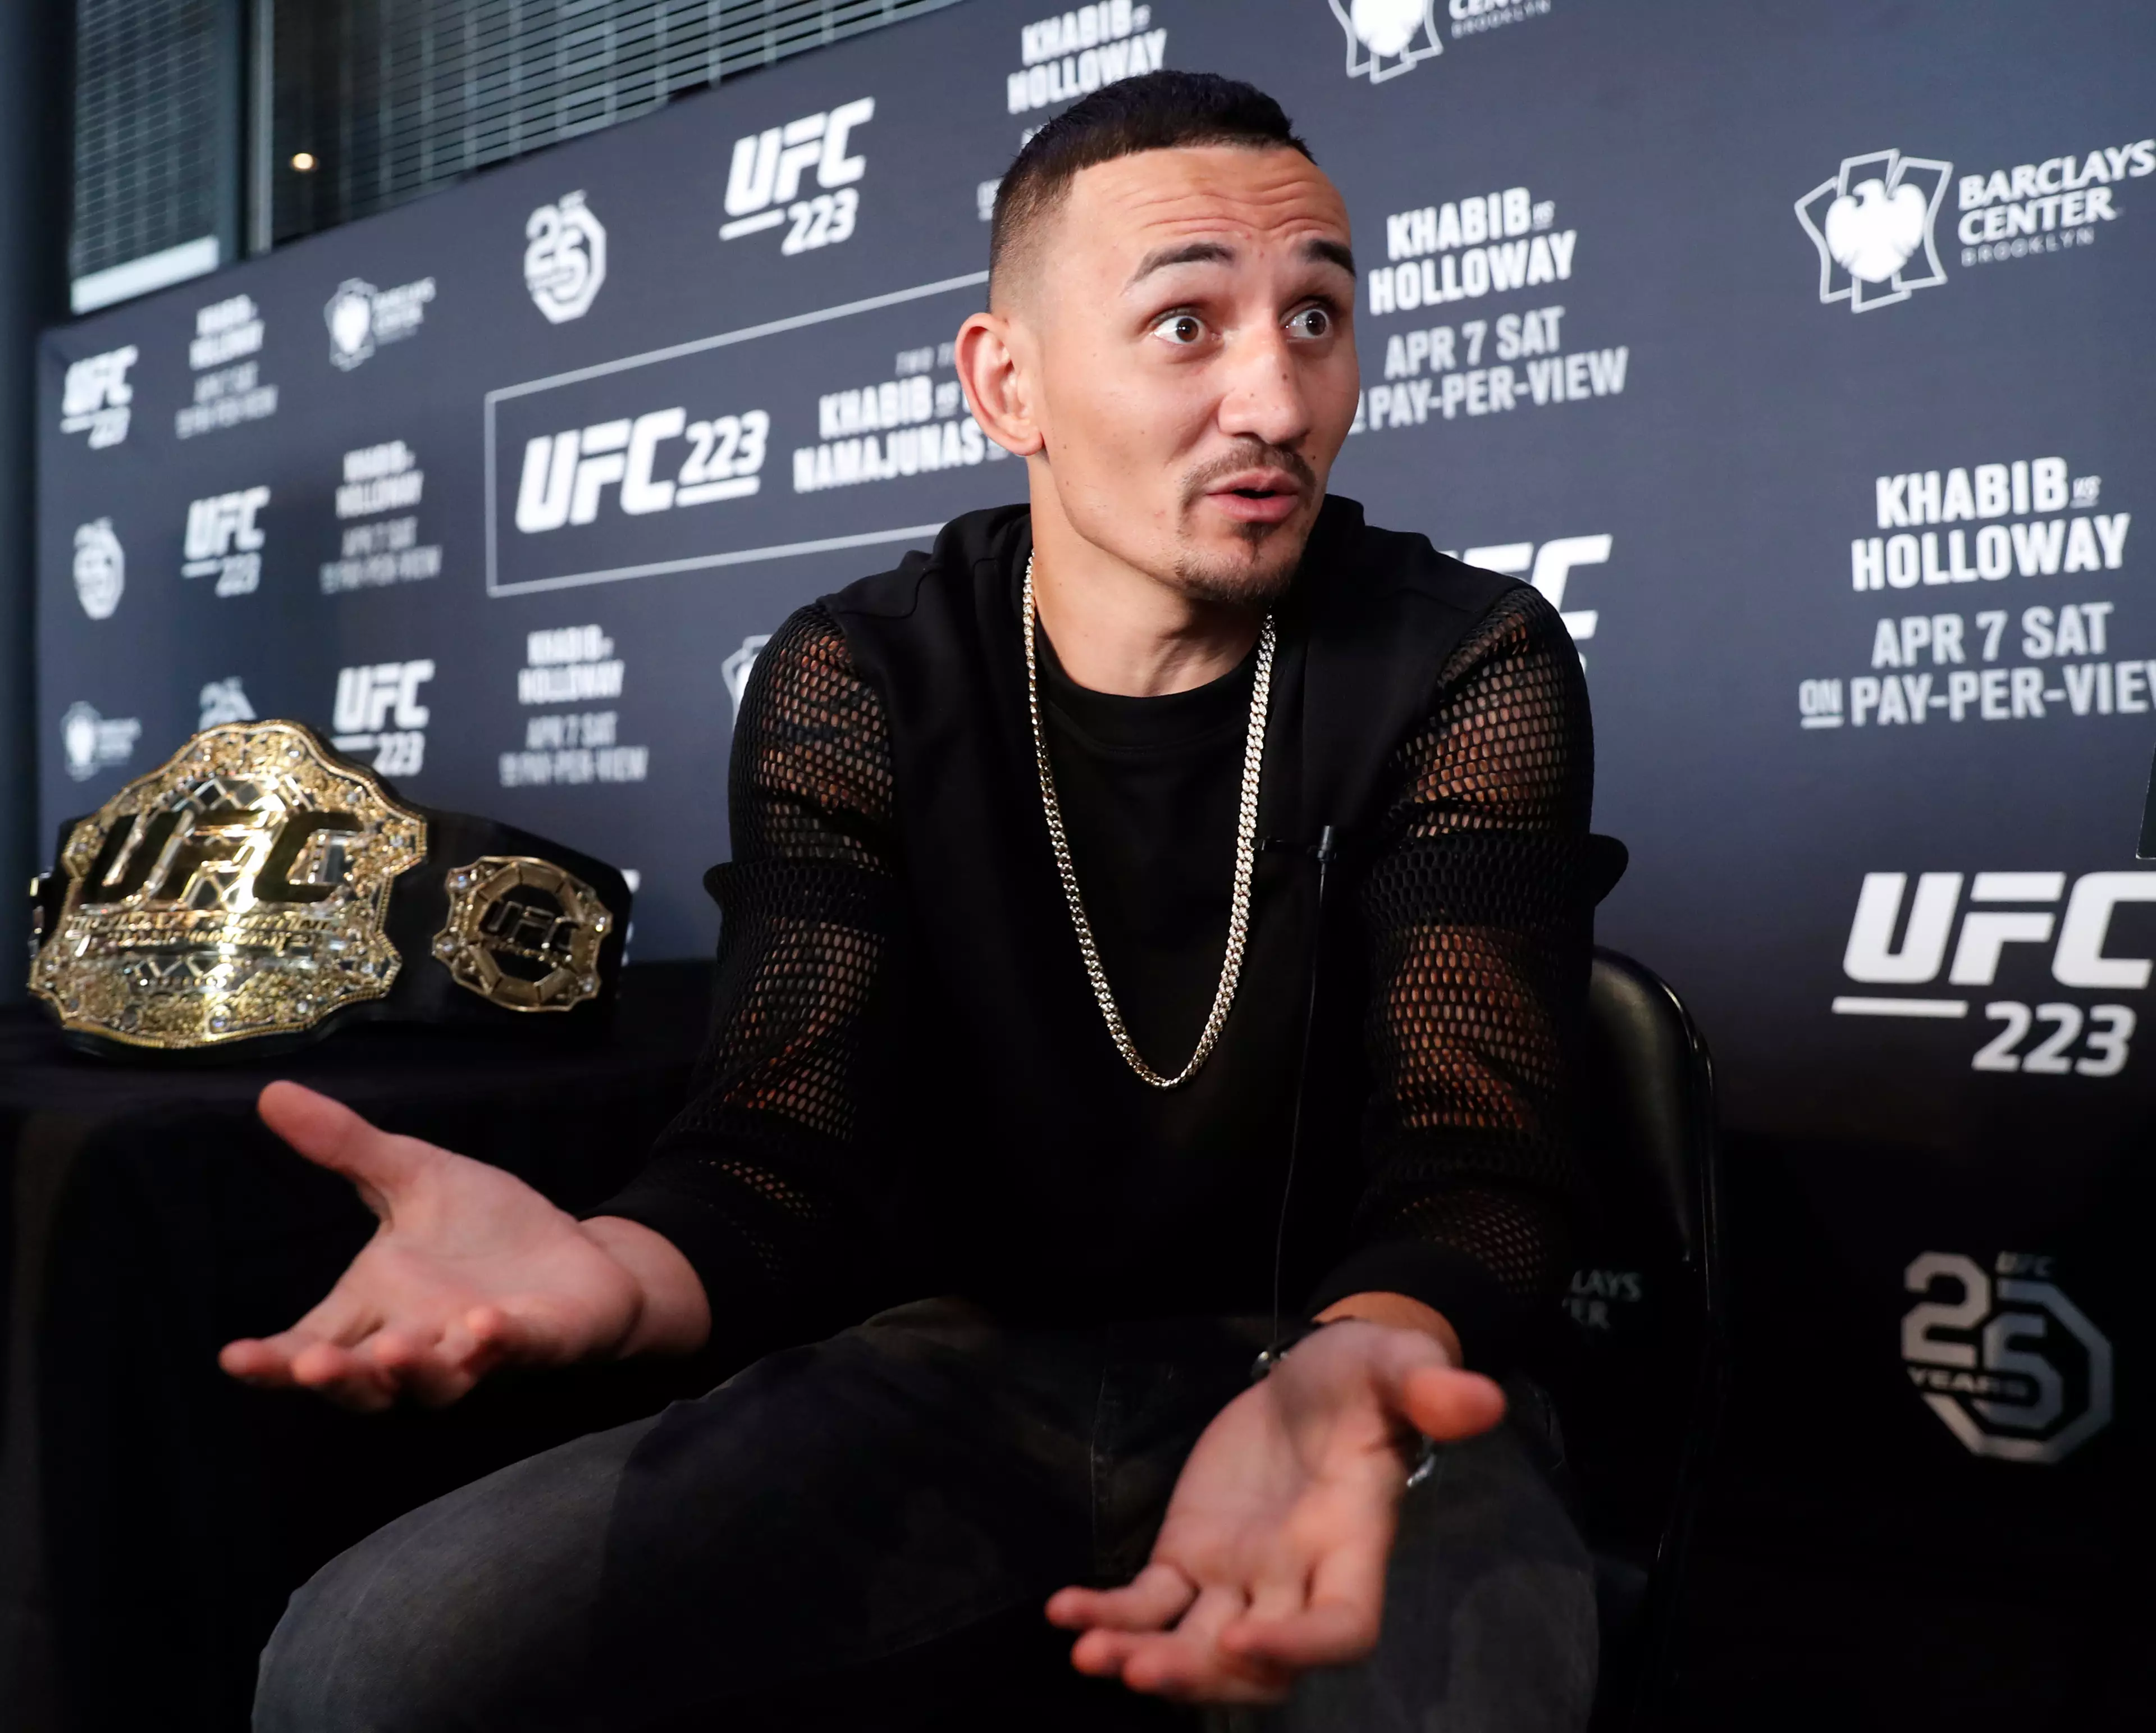 Holloway gestures during UFC media day. Image: PA